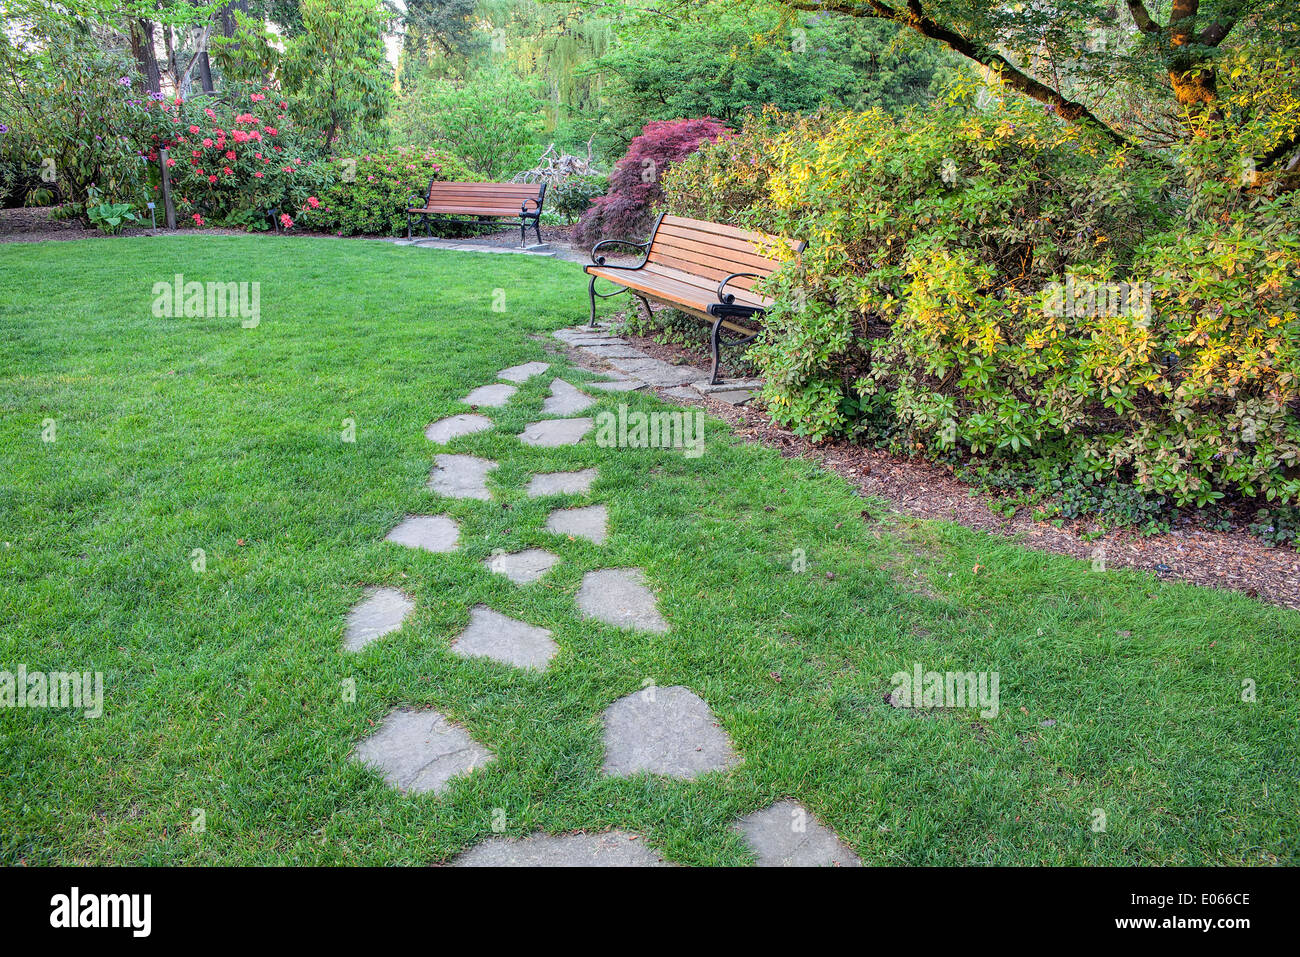 Natural Stone Steps on Green Grass Lawn to Park Bench Stock Photo